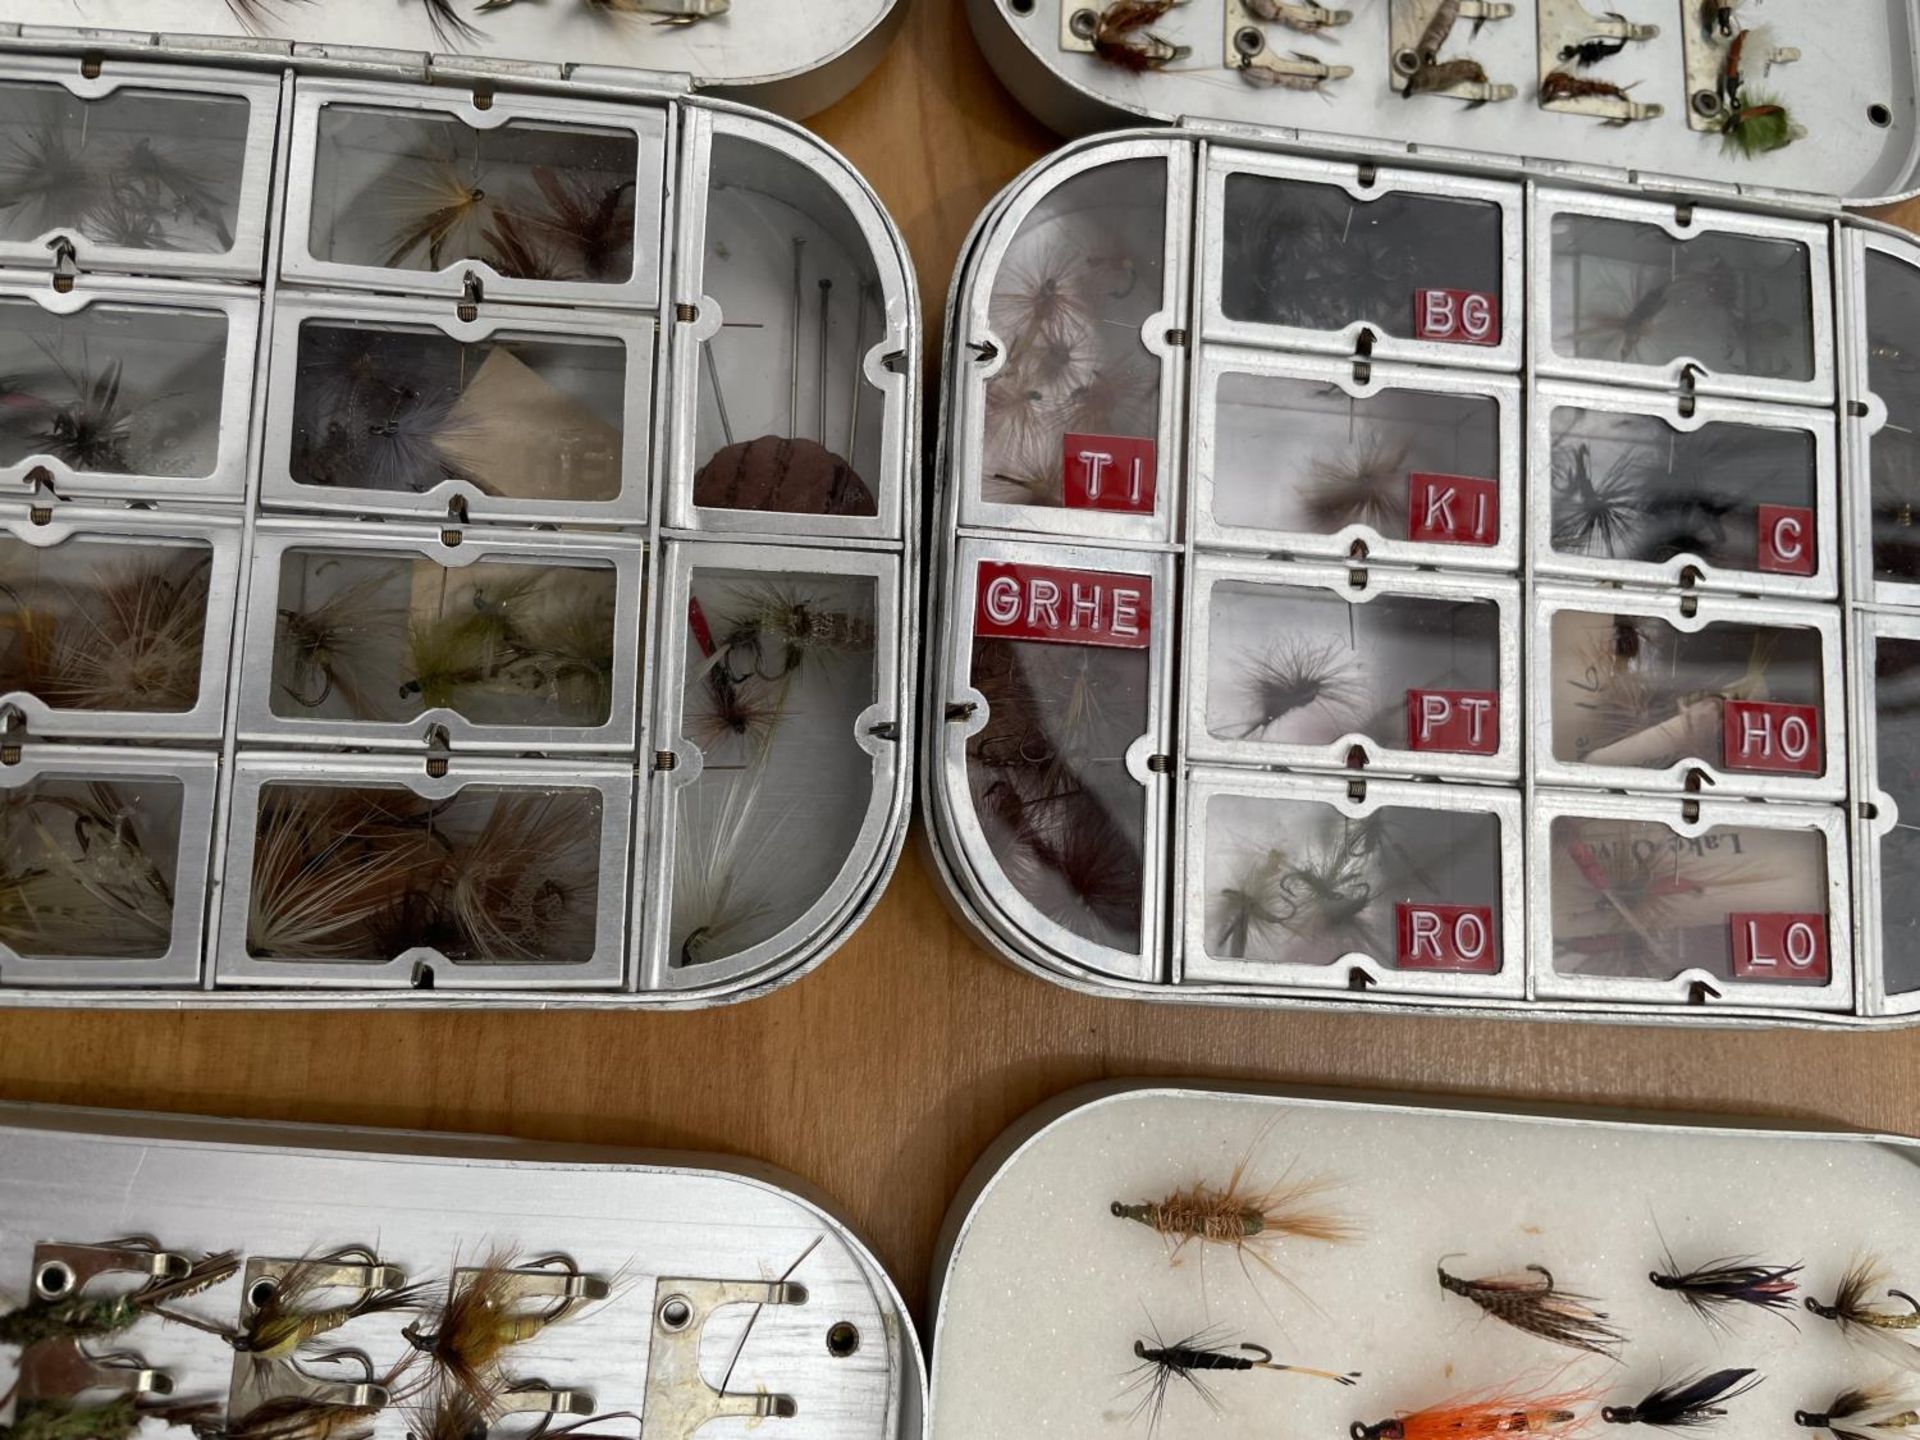 A GROUP OF 5 WHEATLEY BOXES OF FISHING FLIES - Image 2 of 4